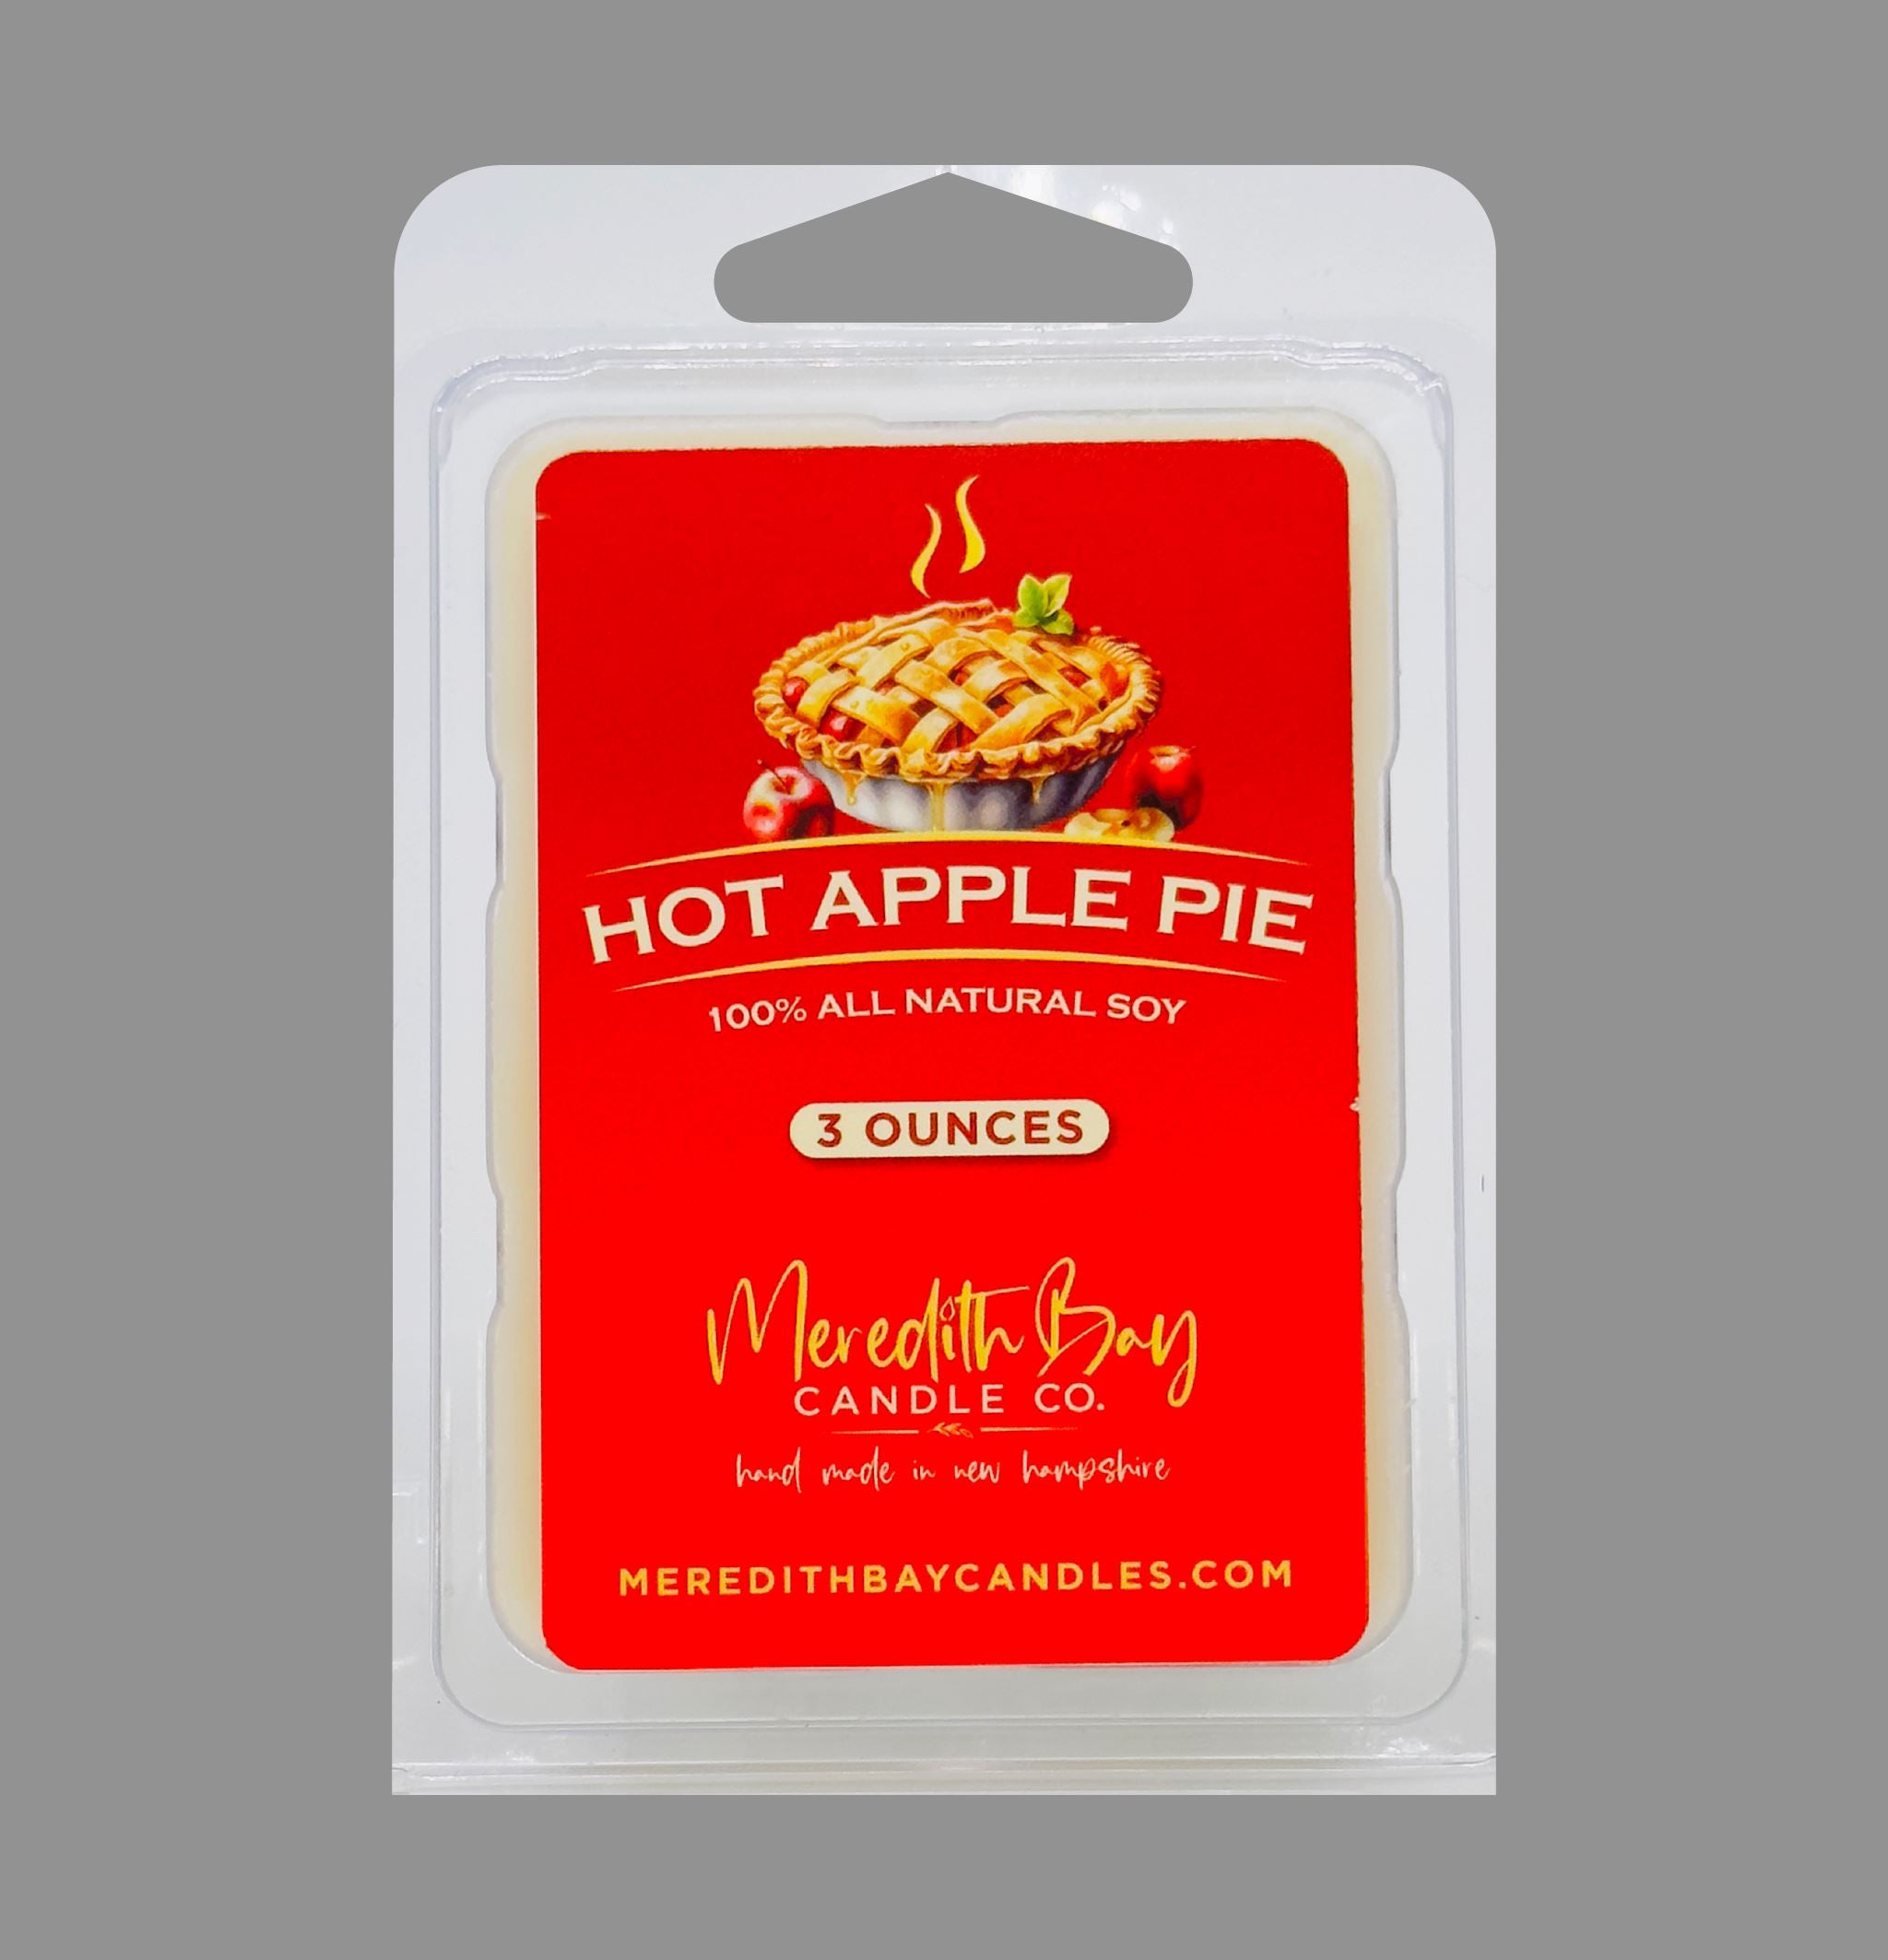 Hot Apple Pie Wax Melt Meredith Bay Candle Co 